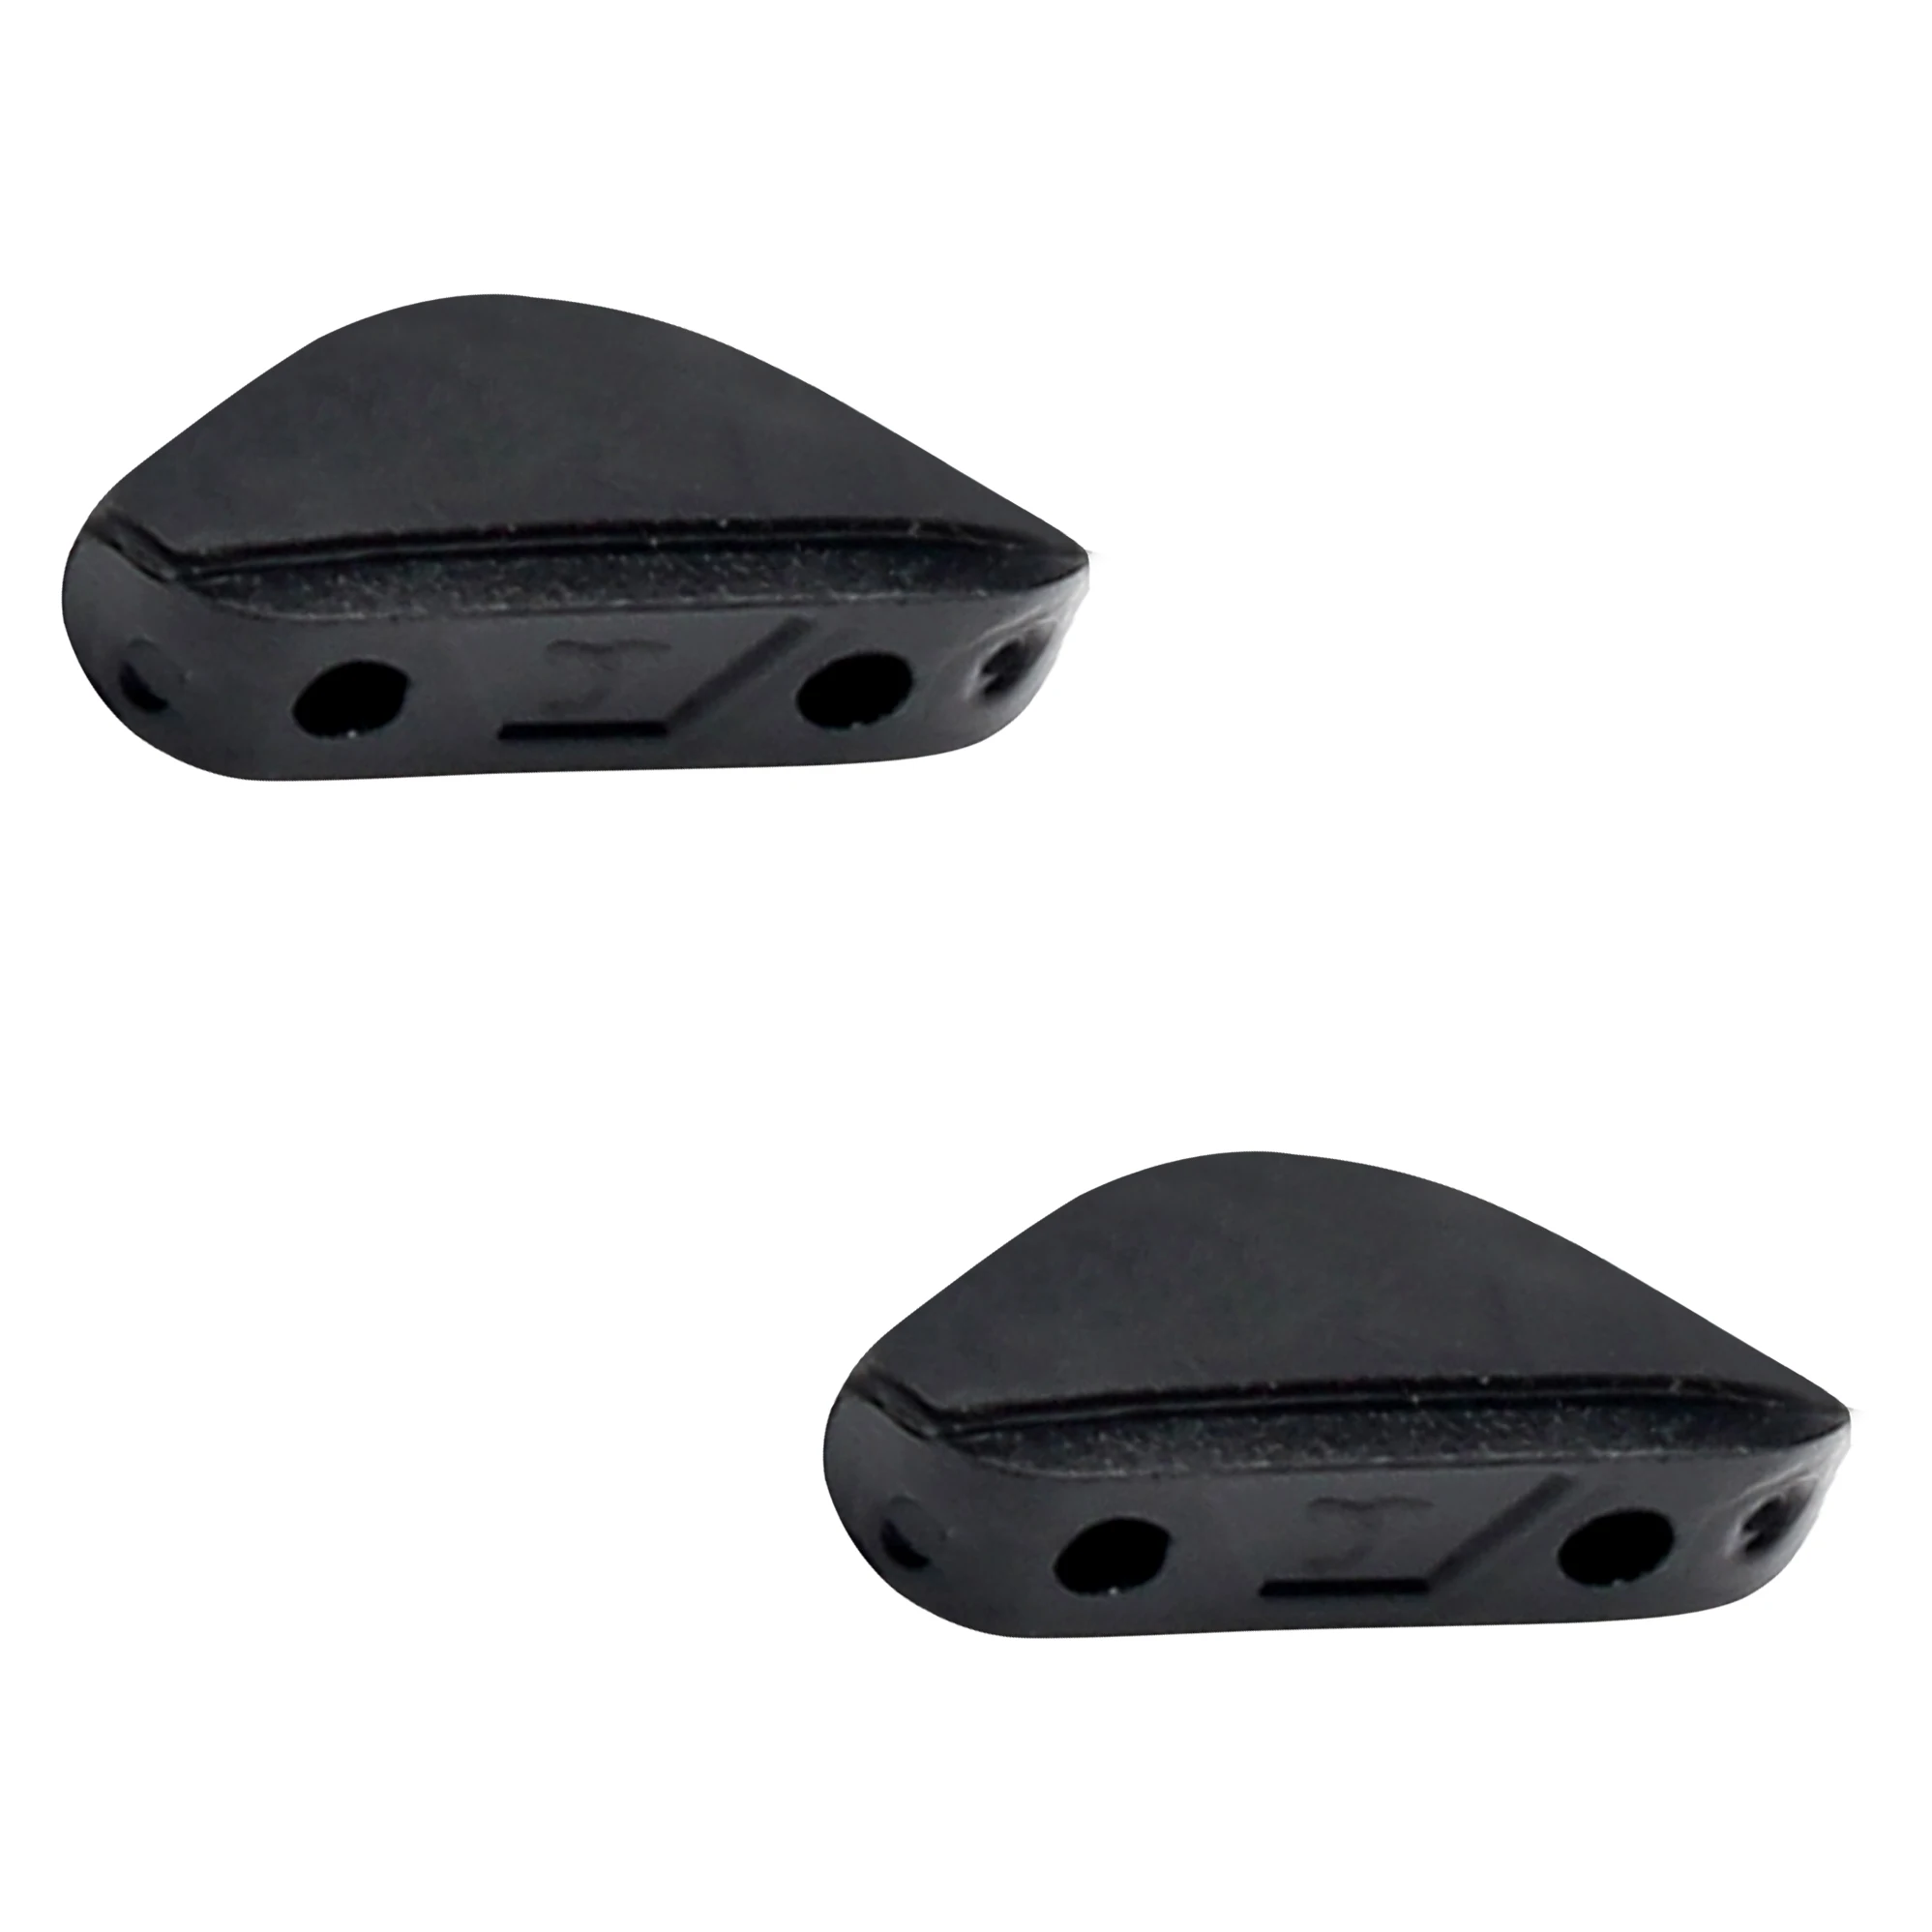 Bwake Replacement Rubber Hard Base Nose Pads for-Oakley Straightlink OO9331 Sunglasses Frame - Multiple Options